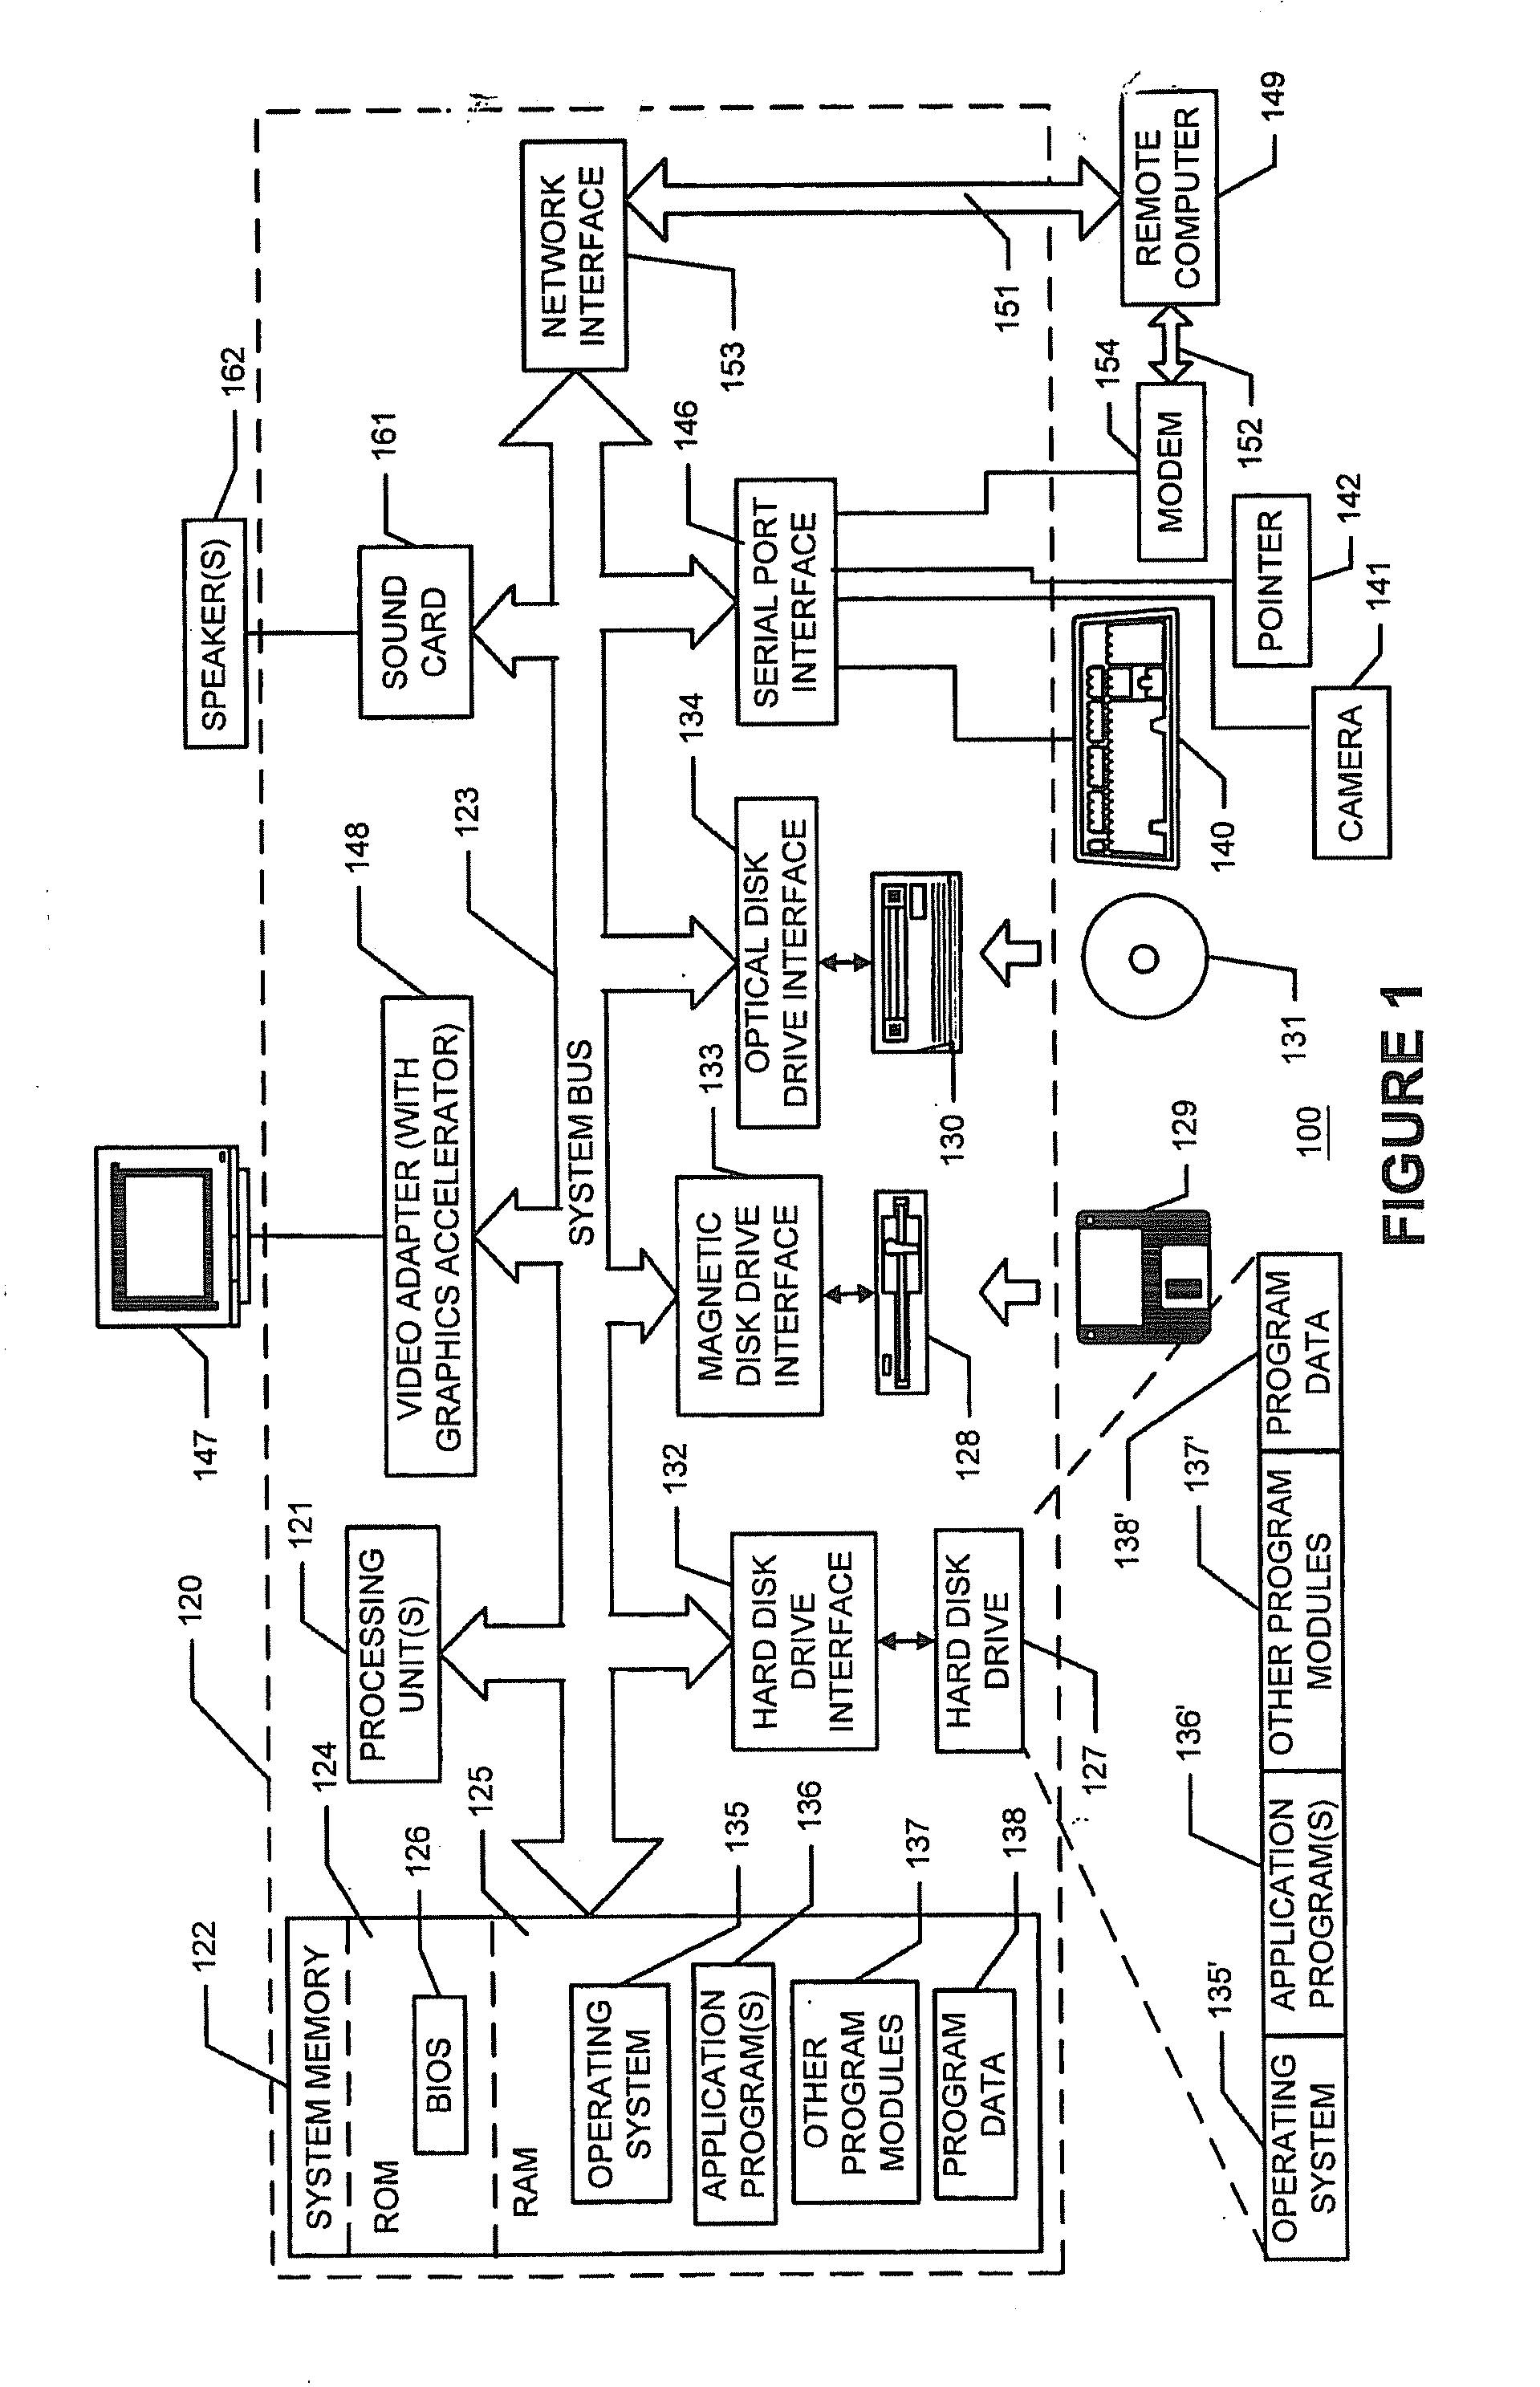 Methods, apparatus and data structures for providing a user interface to objects, the user interface exploiting spatial memory and visually indicating at least one object parameter